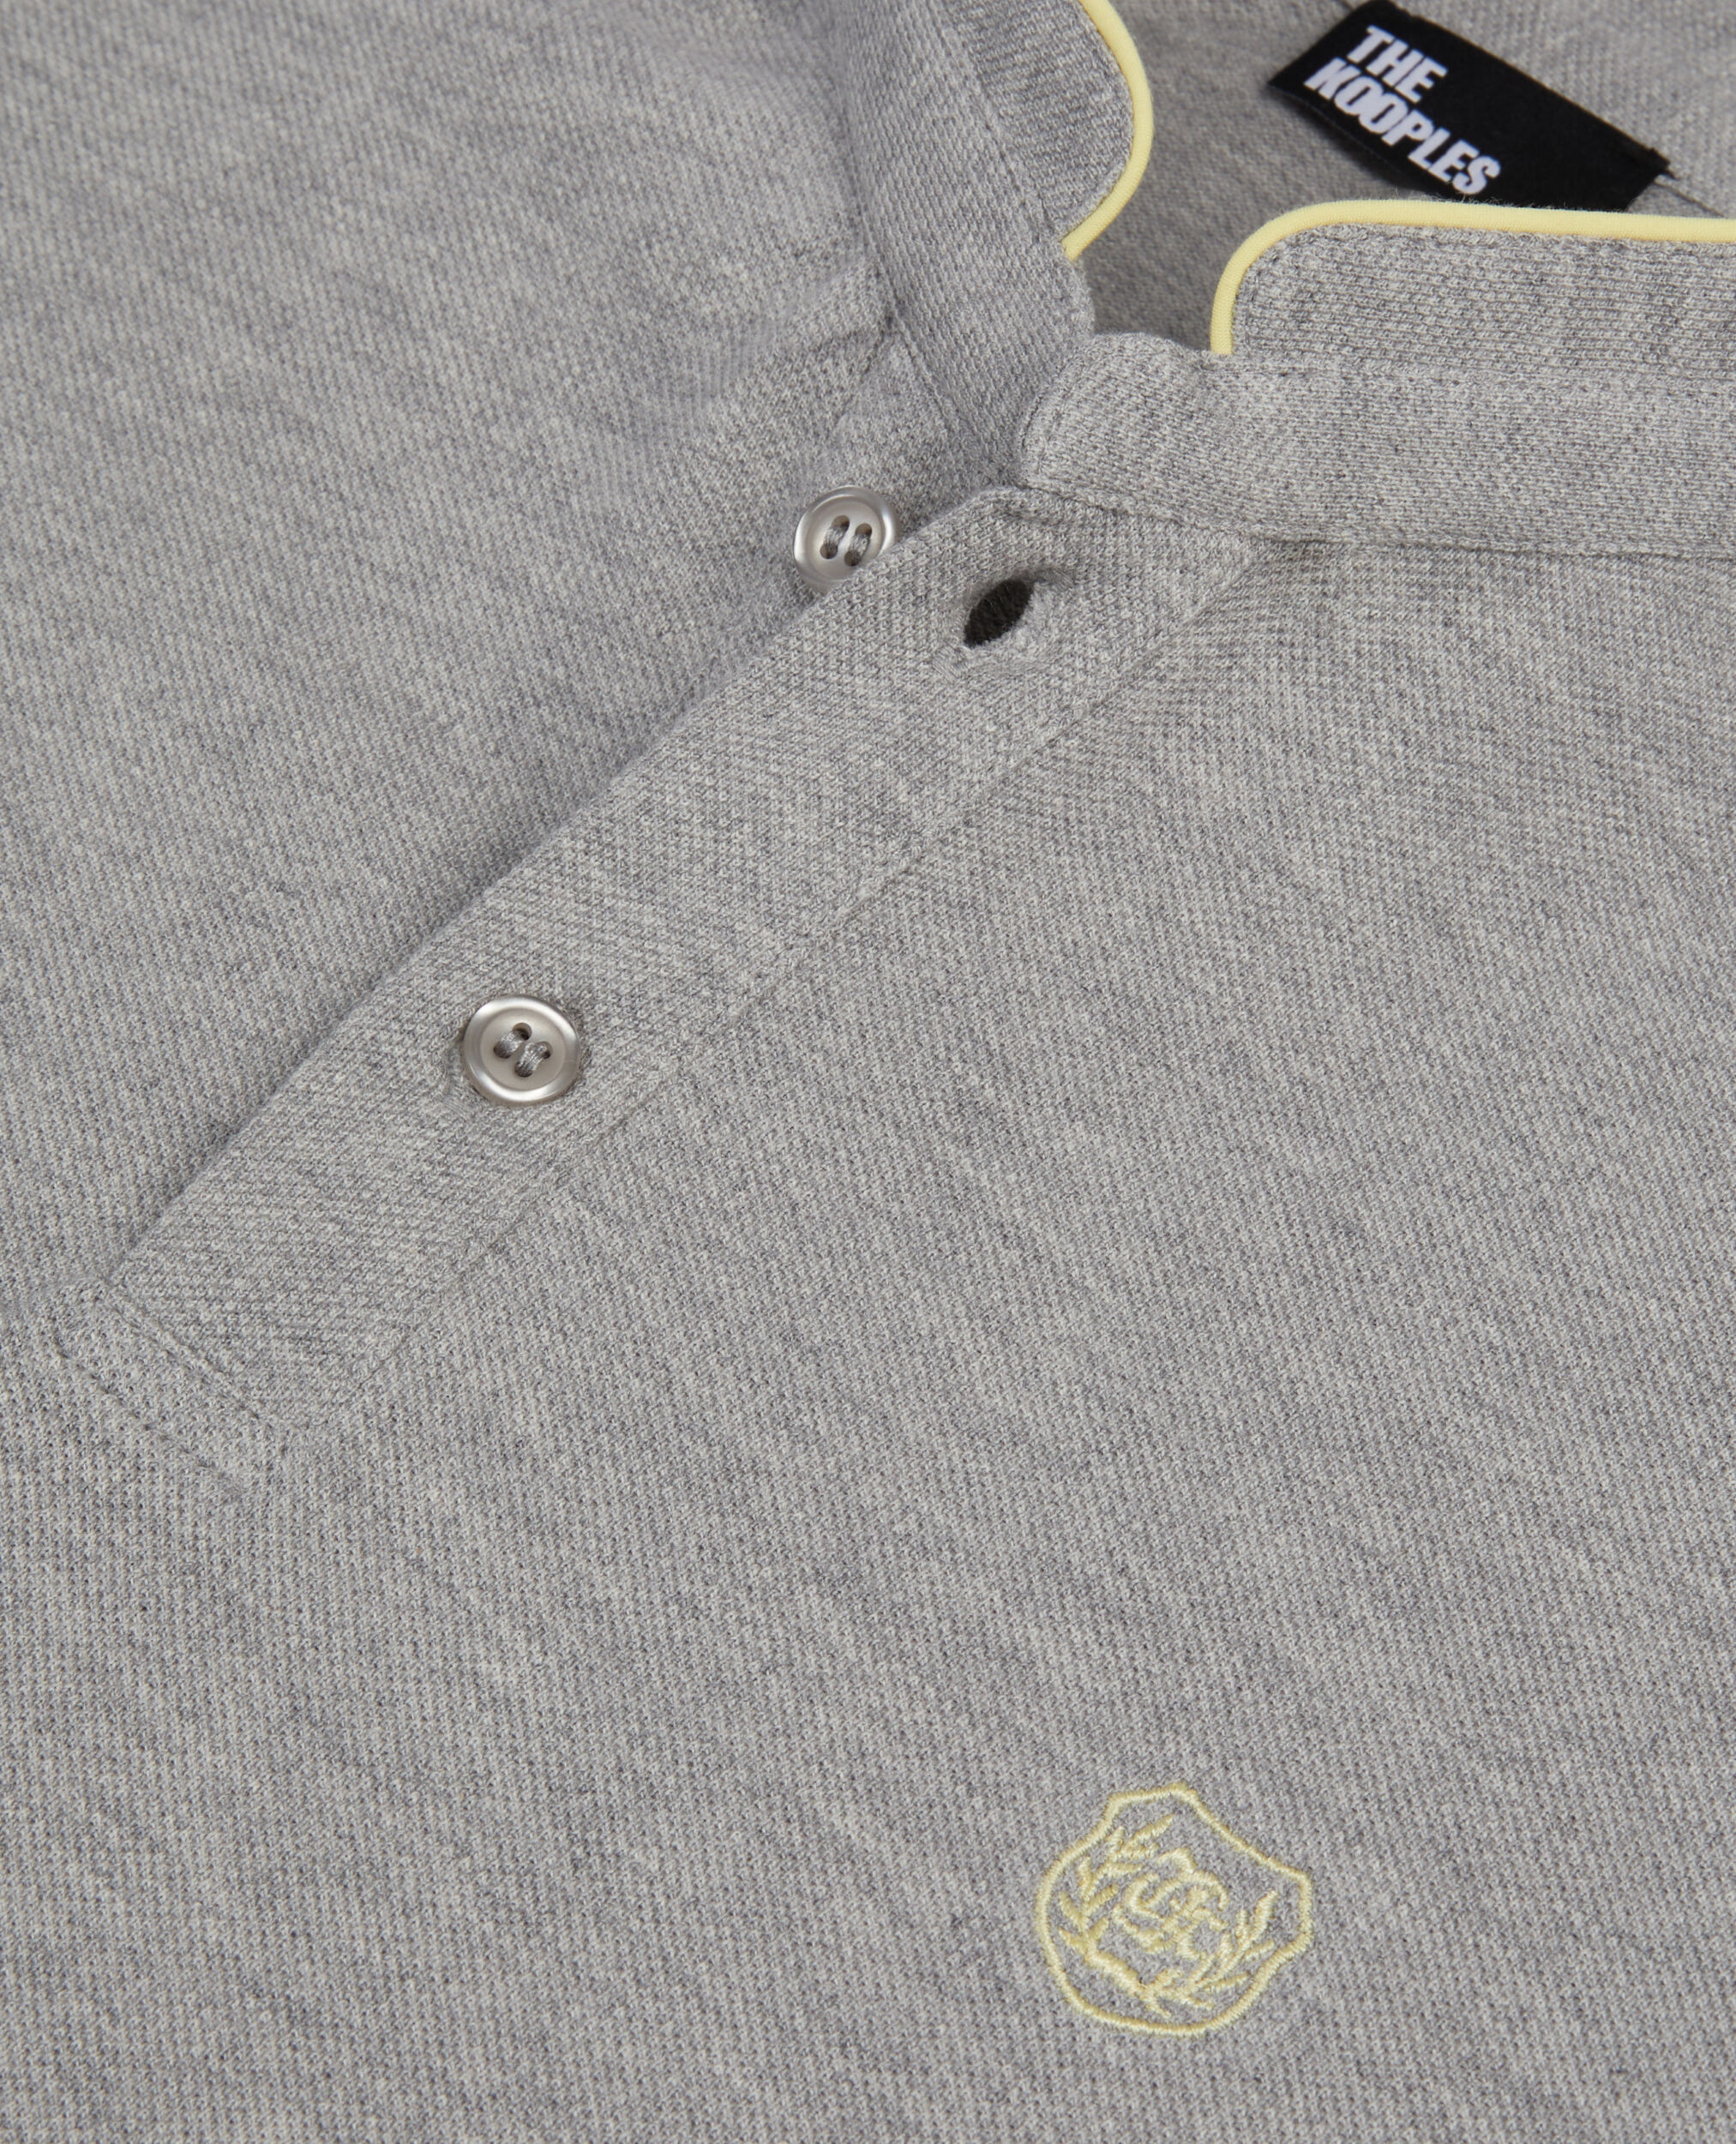 Grey pique cotton polo t-shirt, GREY YELLOW, hi-res image number null